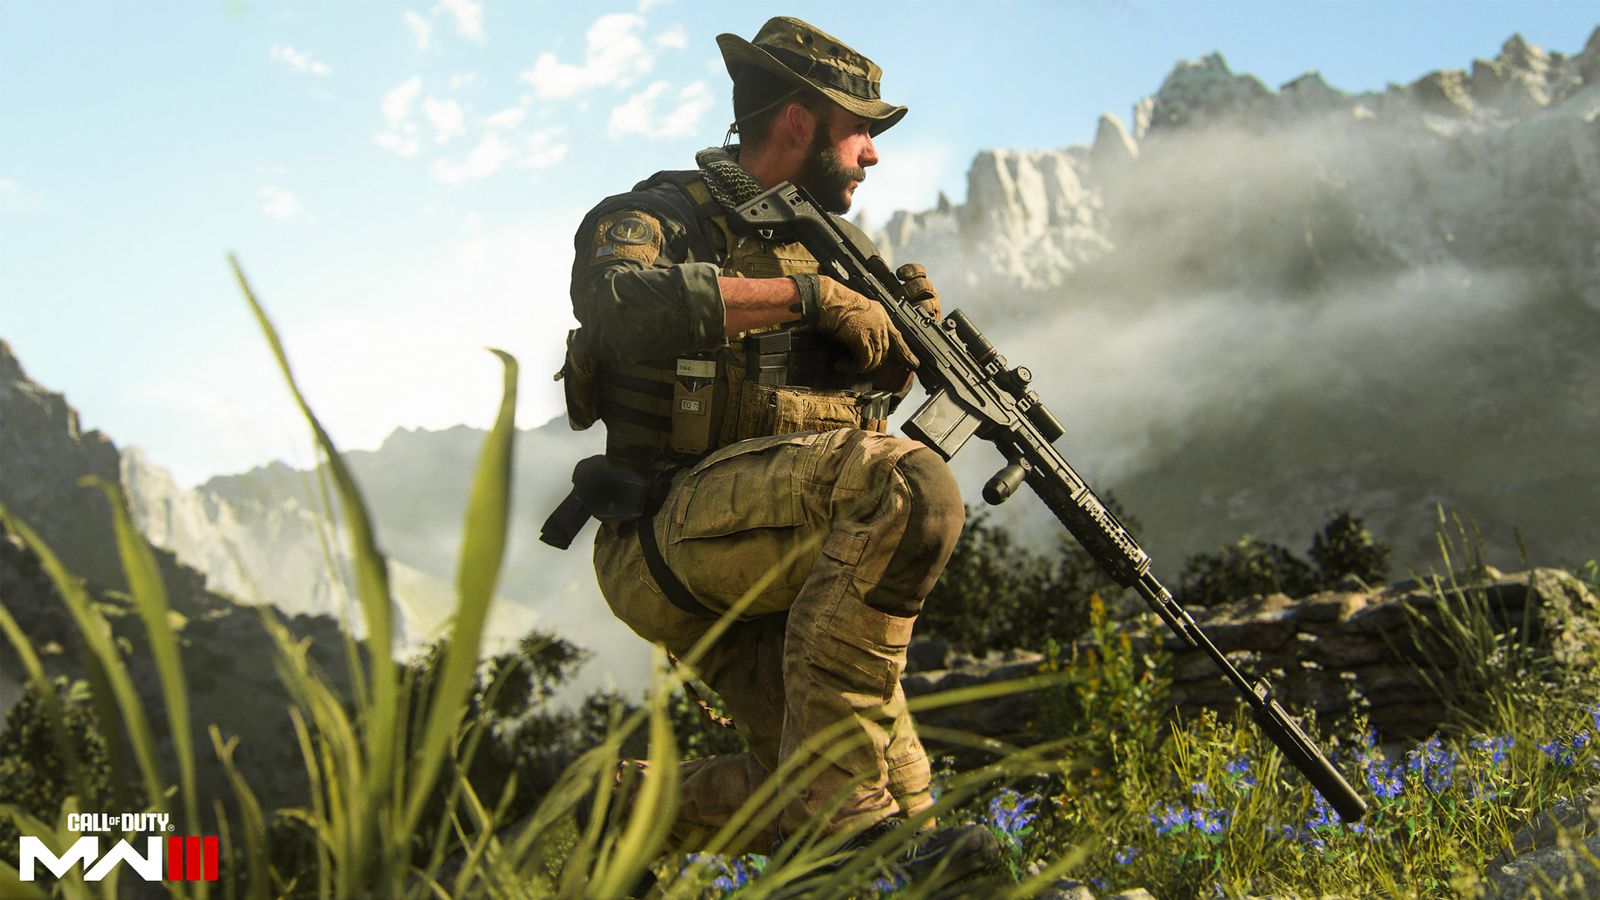 Call of Duty Next Captain Price kneeling while pointing gun at ground